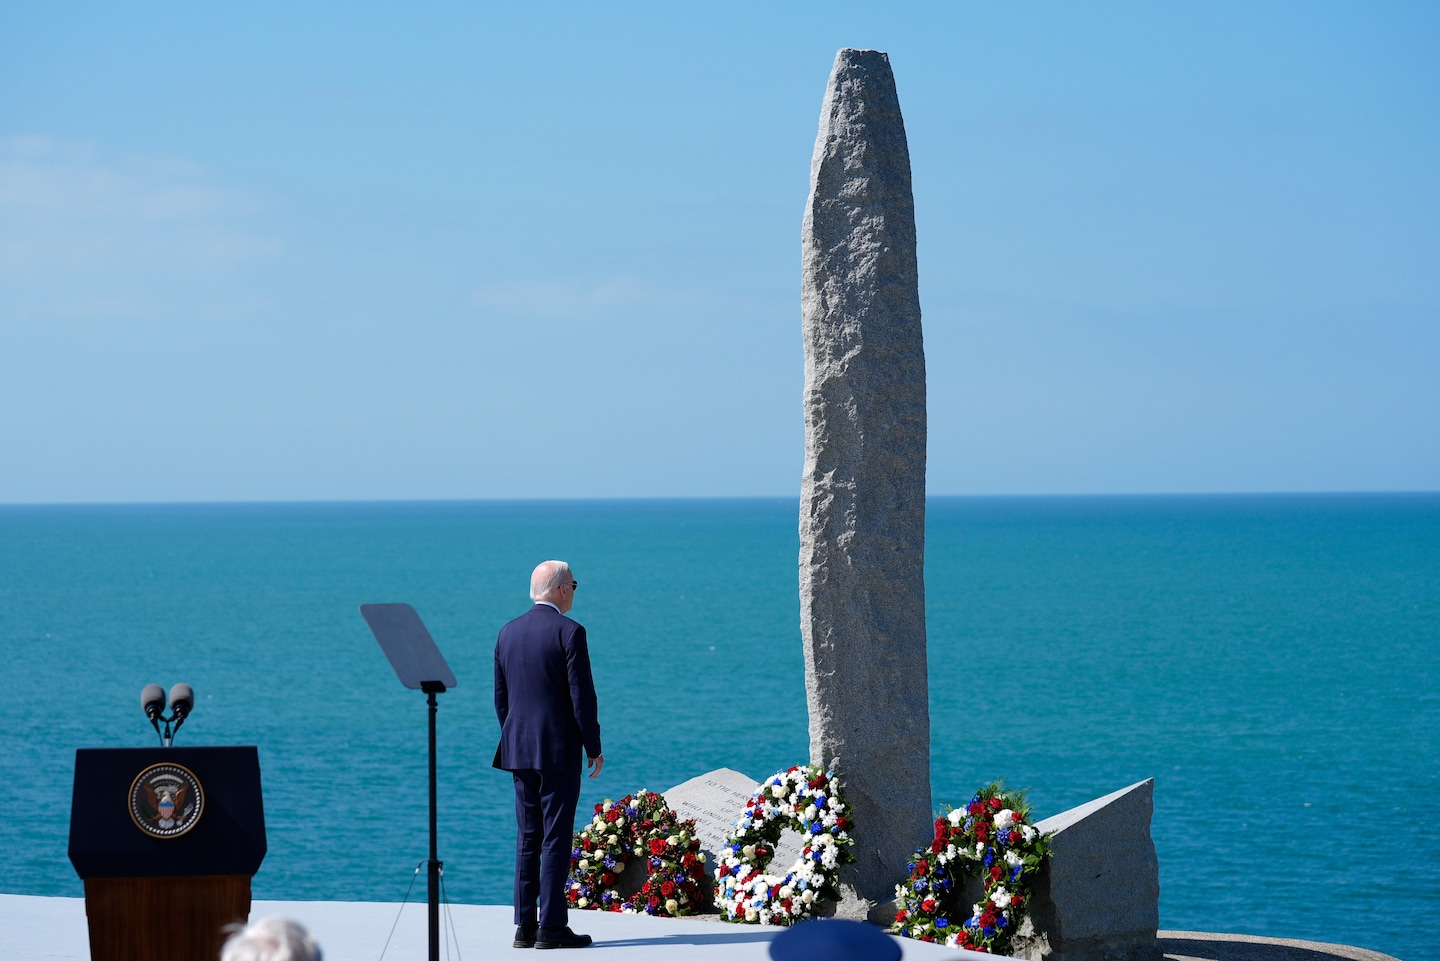 Today’s western alliance needs the spirit of the Boys of Pointe du Hoc